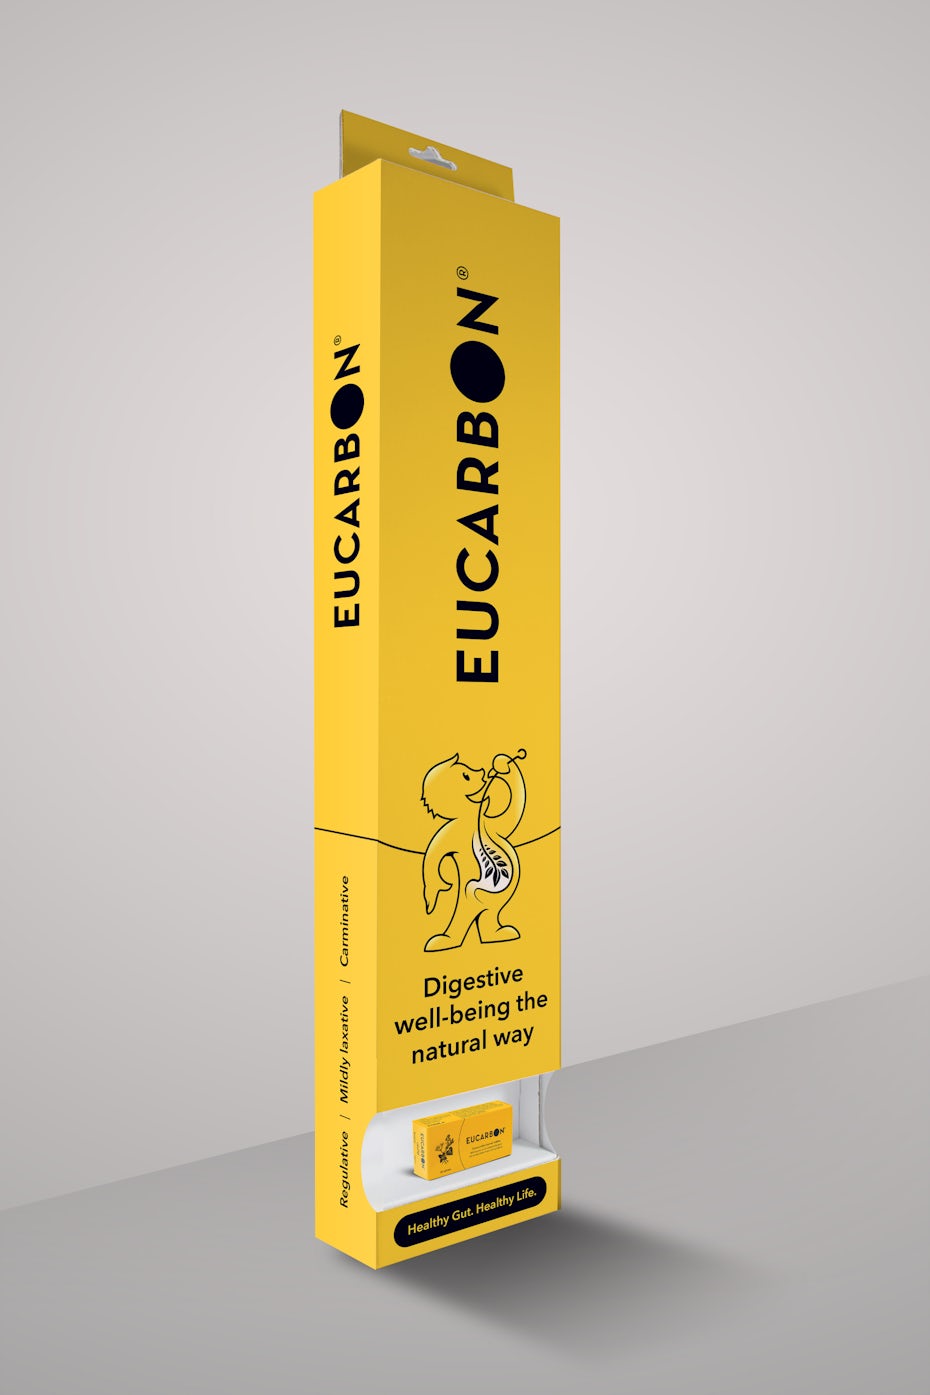 A bright, yellow medical packaging